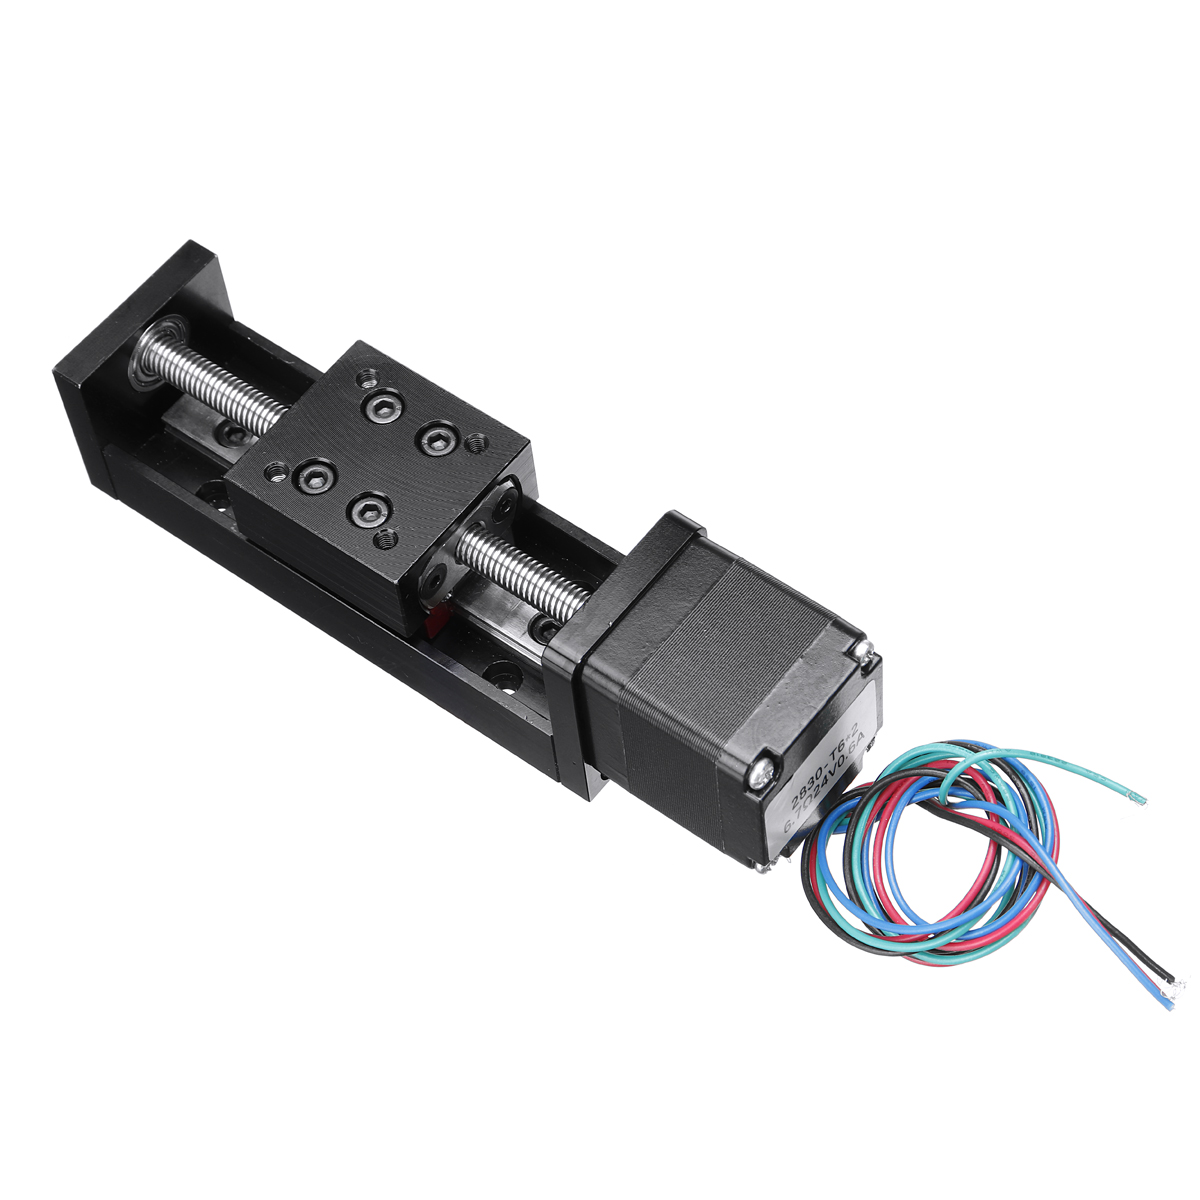 50100150200mm-T6-Linear-CNC-Slide-Stage-Actuator-Motor-Stepper-Stroke-Actuator-1526426-8